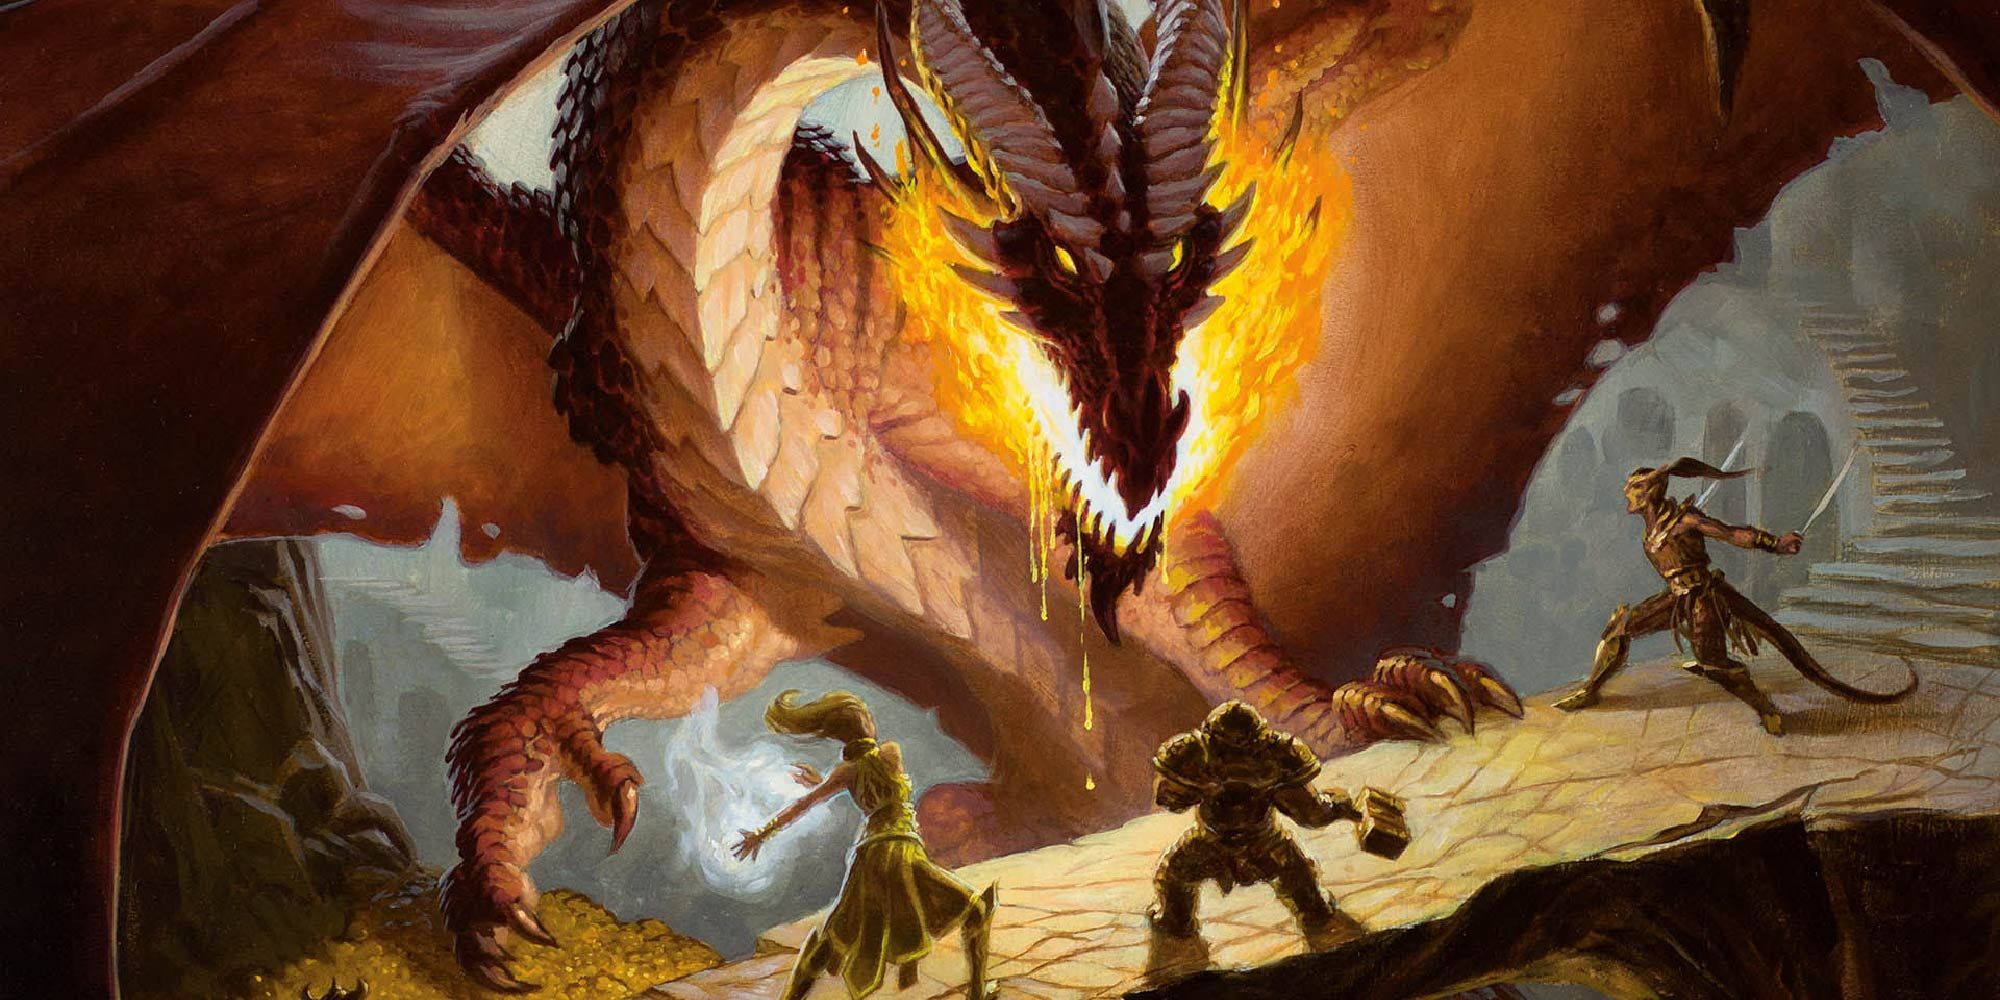 A group of adventurers face off against the fearsome Red Dragon in Dungeons and Dragons.